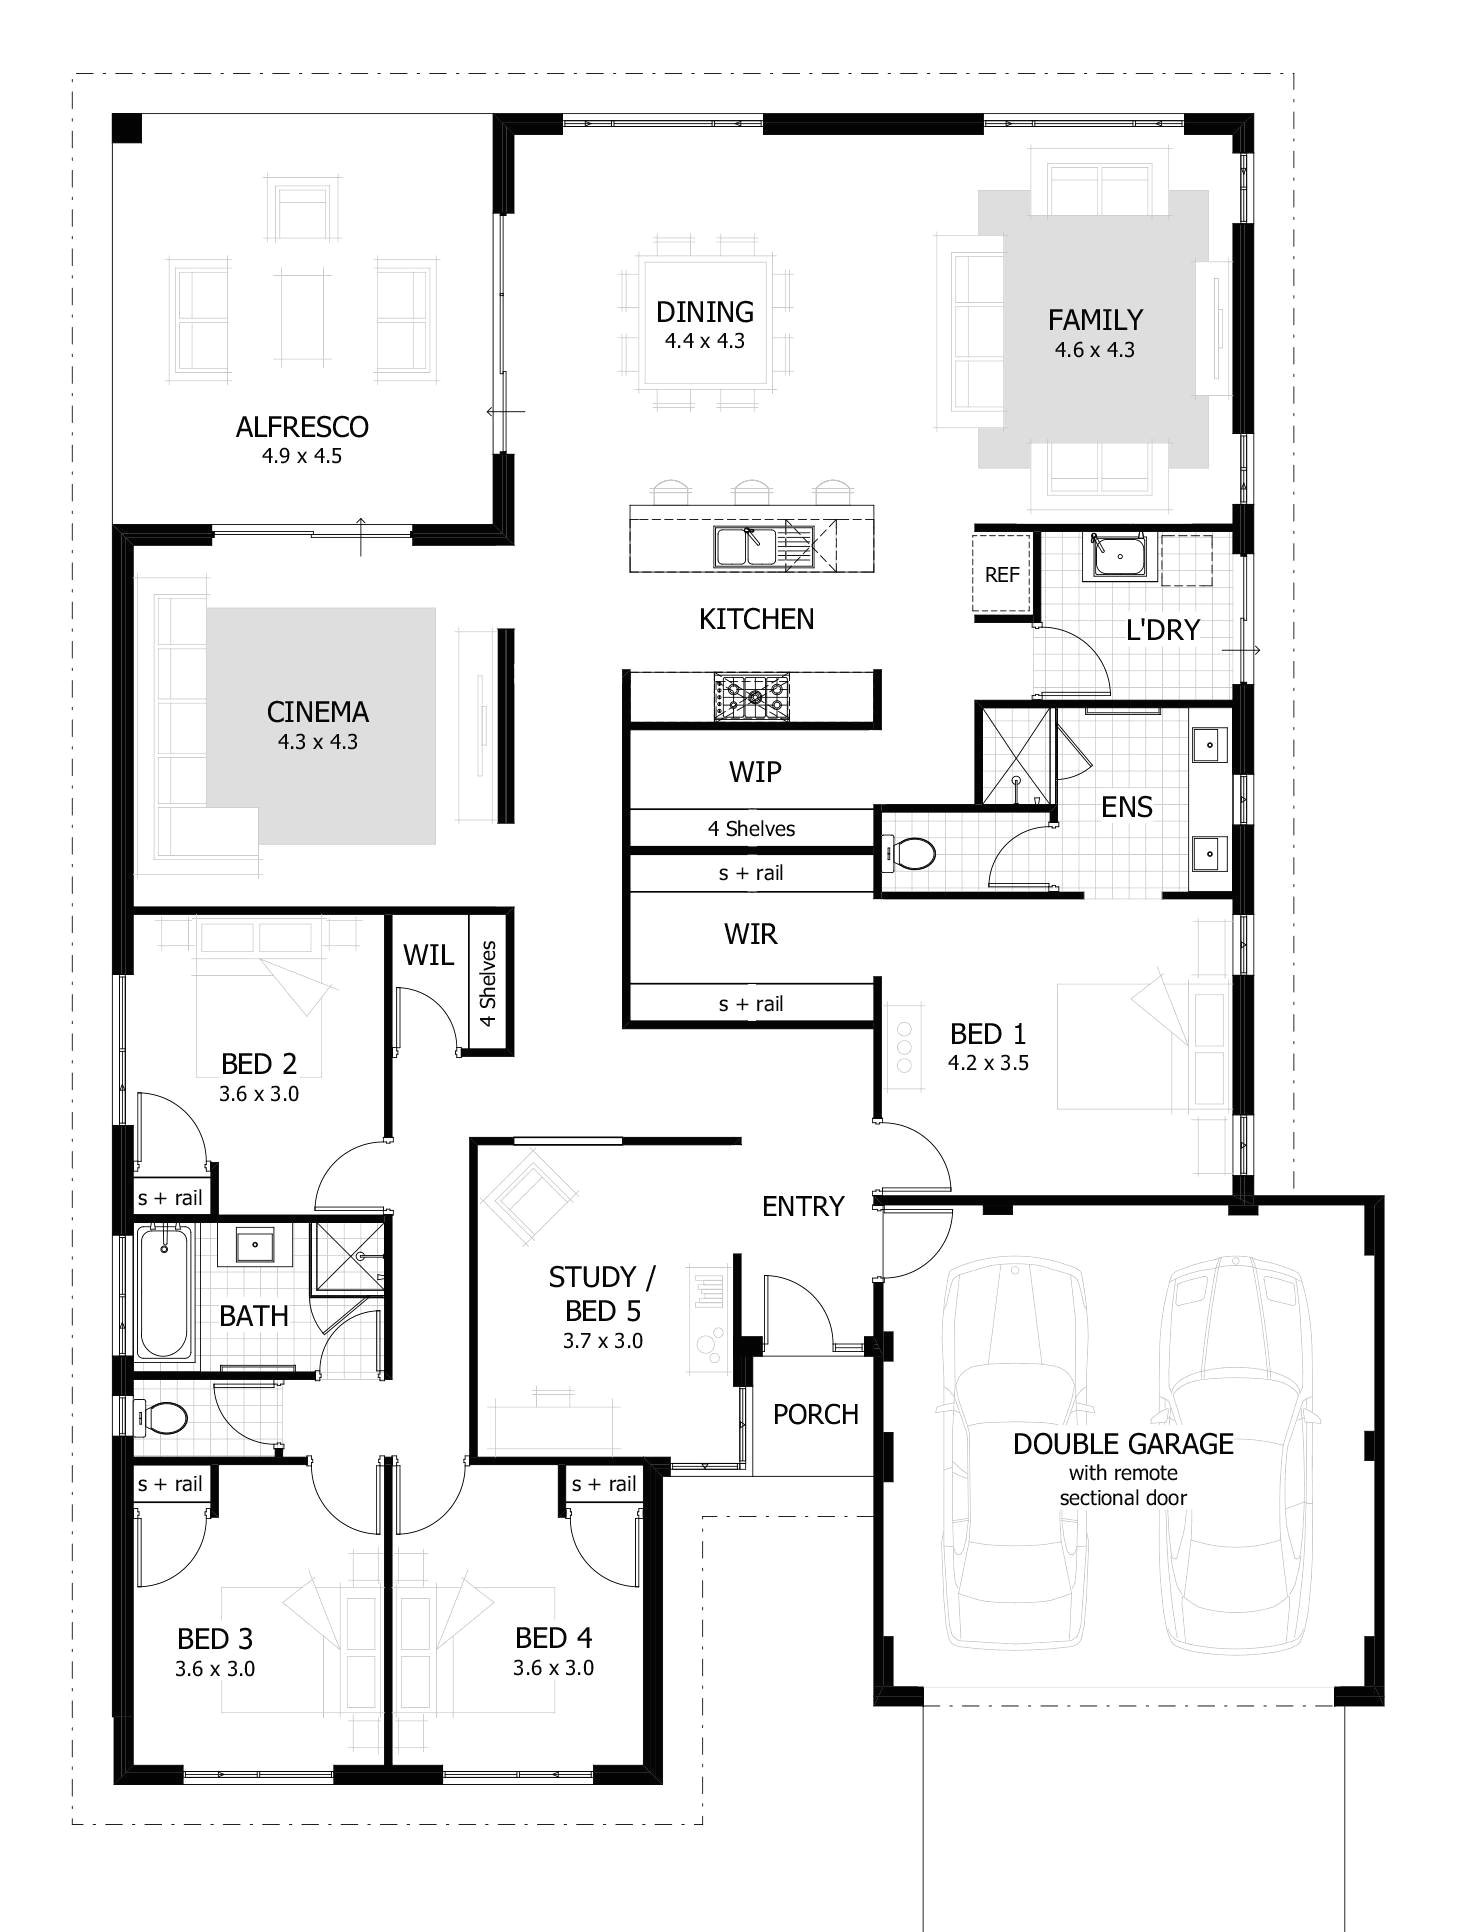 sustainable home plans luxury new home floorplans beautiful line floor plans new home plans 0d